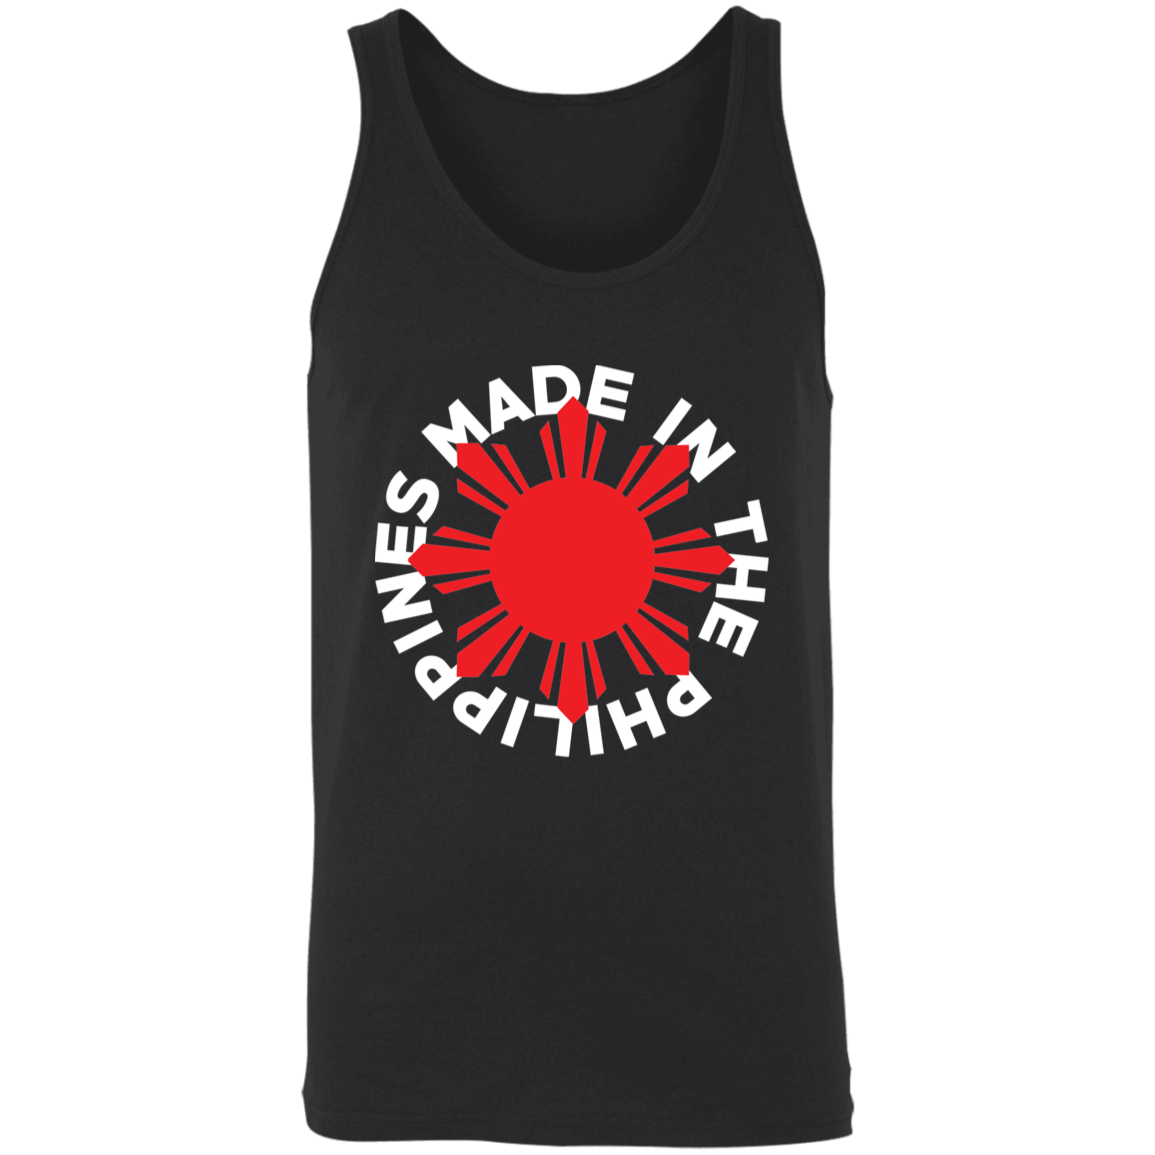 Made in the Philippines Red Sun Unisex Cotton Tank Top